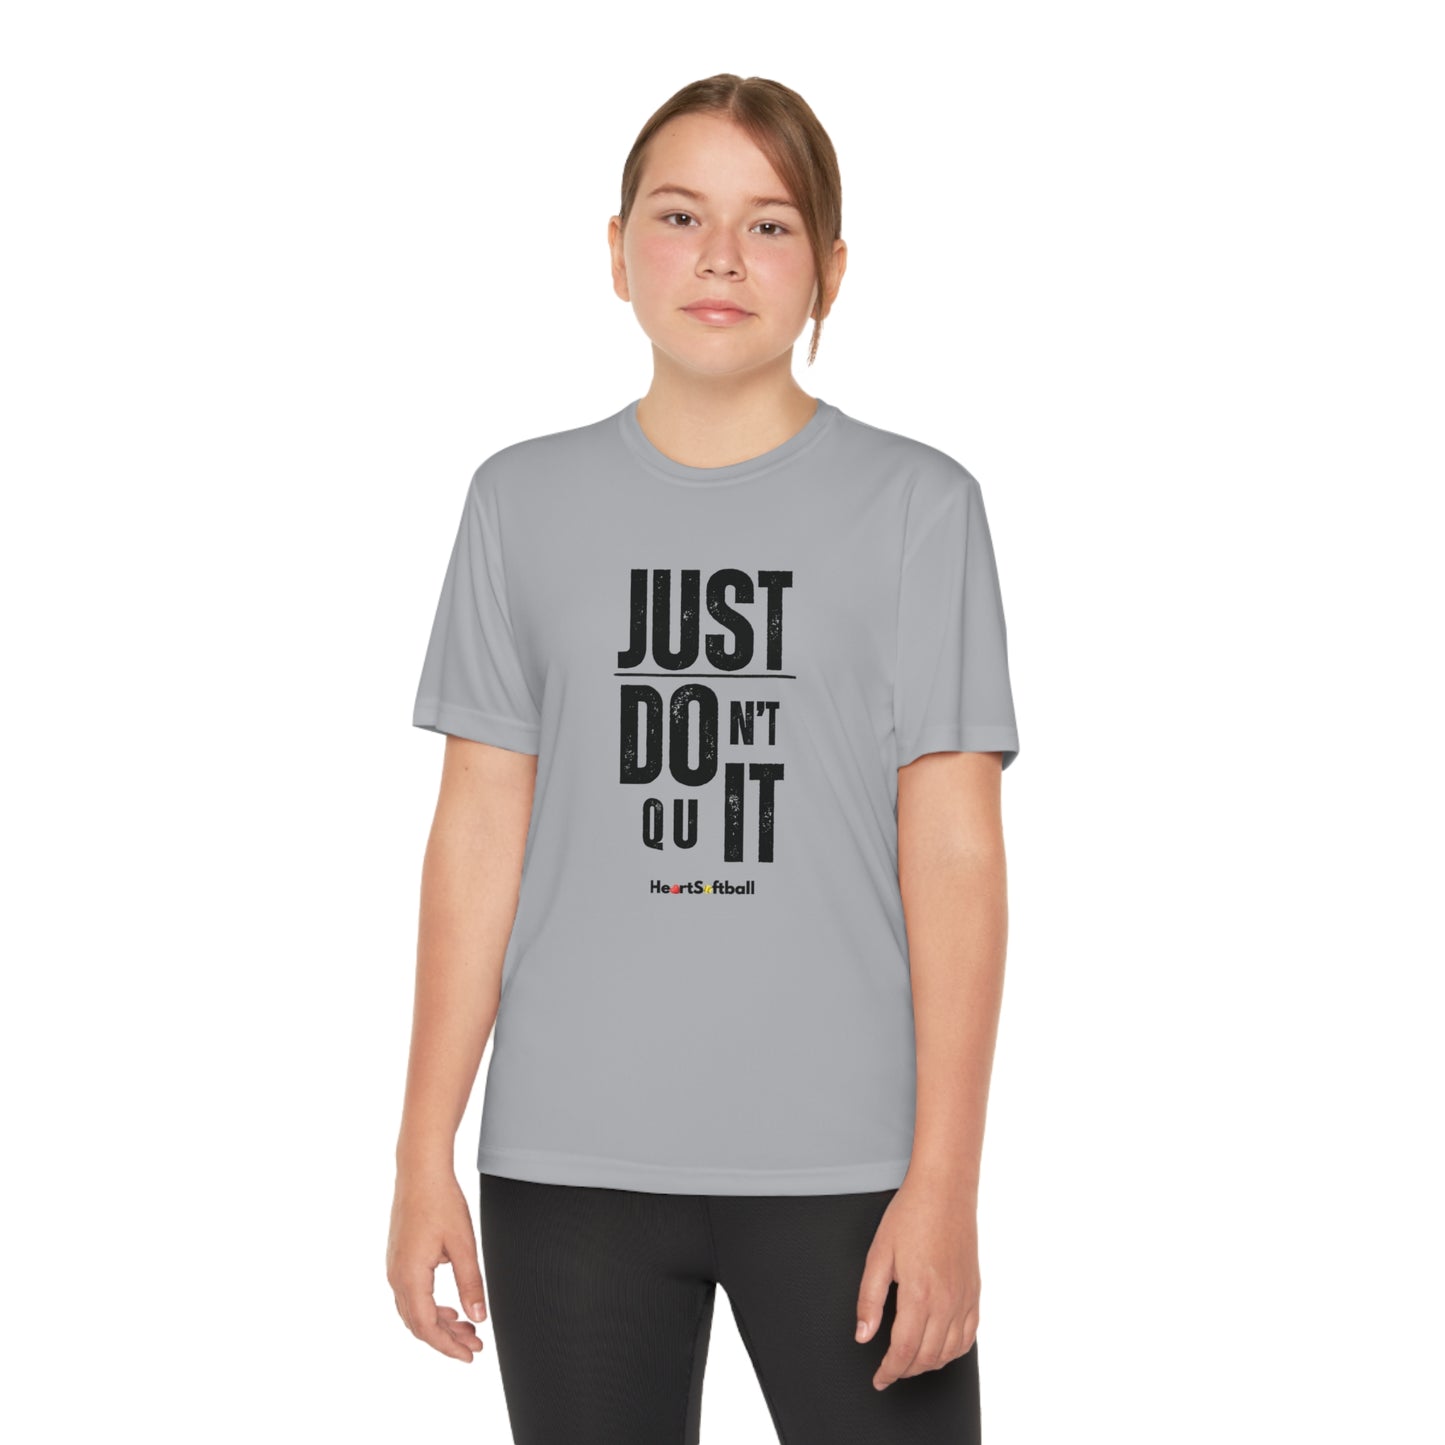 Just Do It Youth Athletic Tee